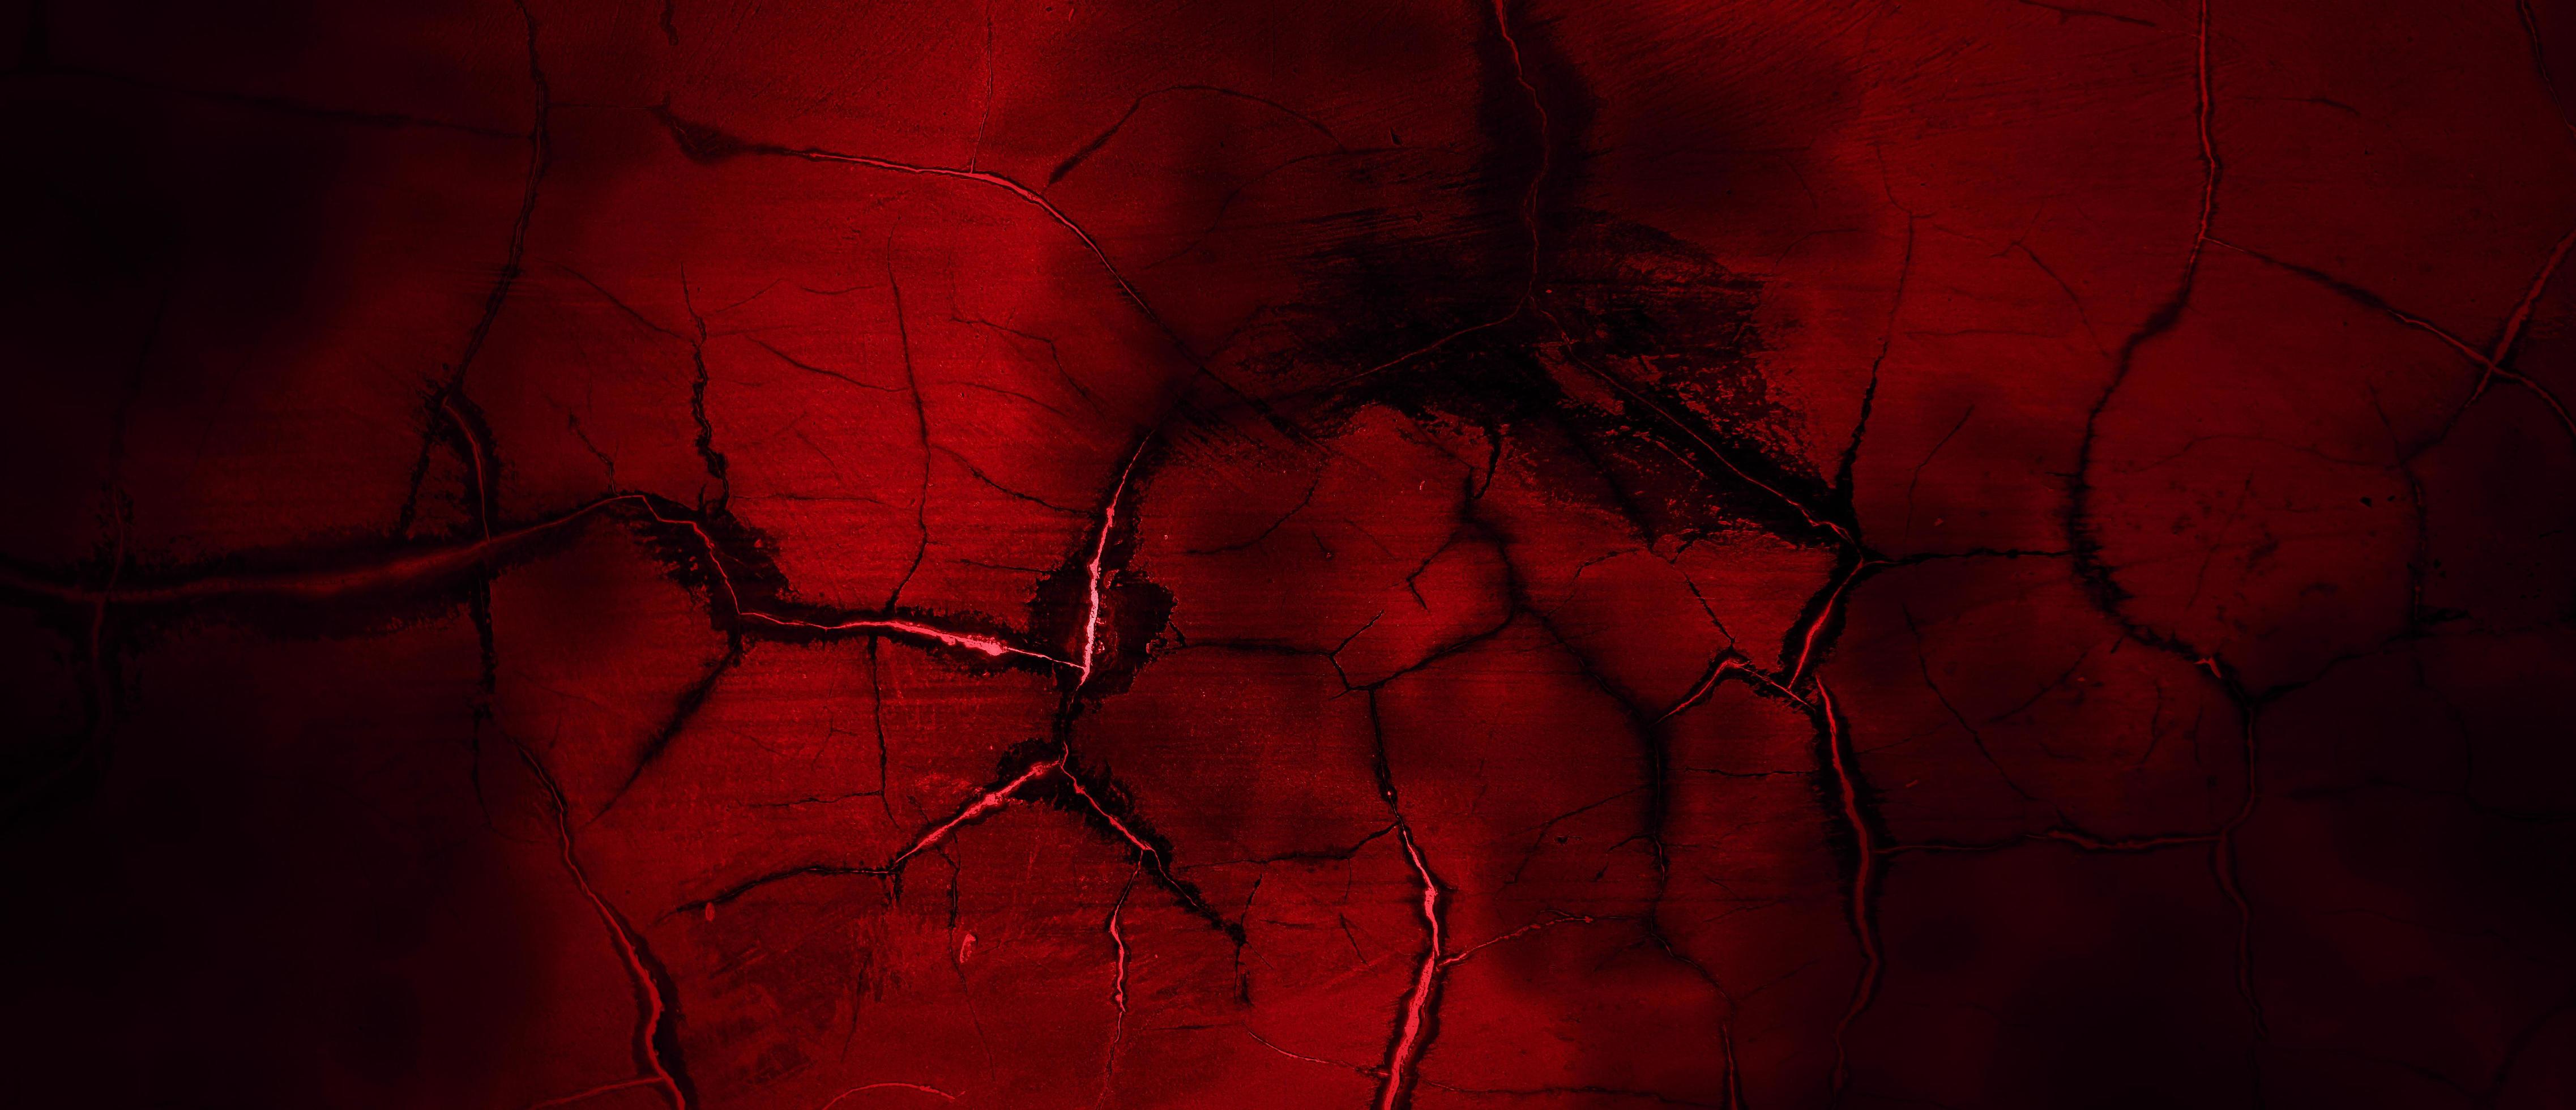 Scary Red and black horror background. Dark grunge red concrete 3713996  Stock Photo at Vecteezy